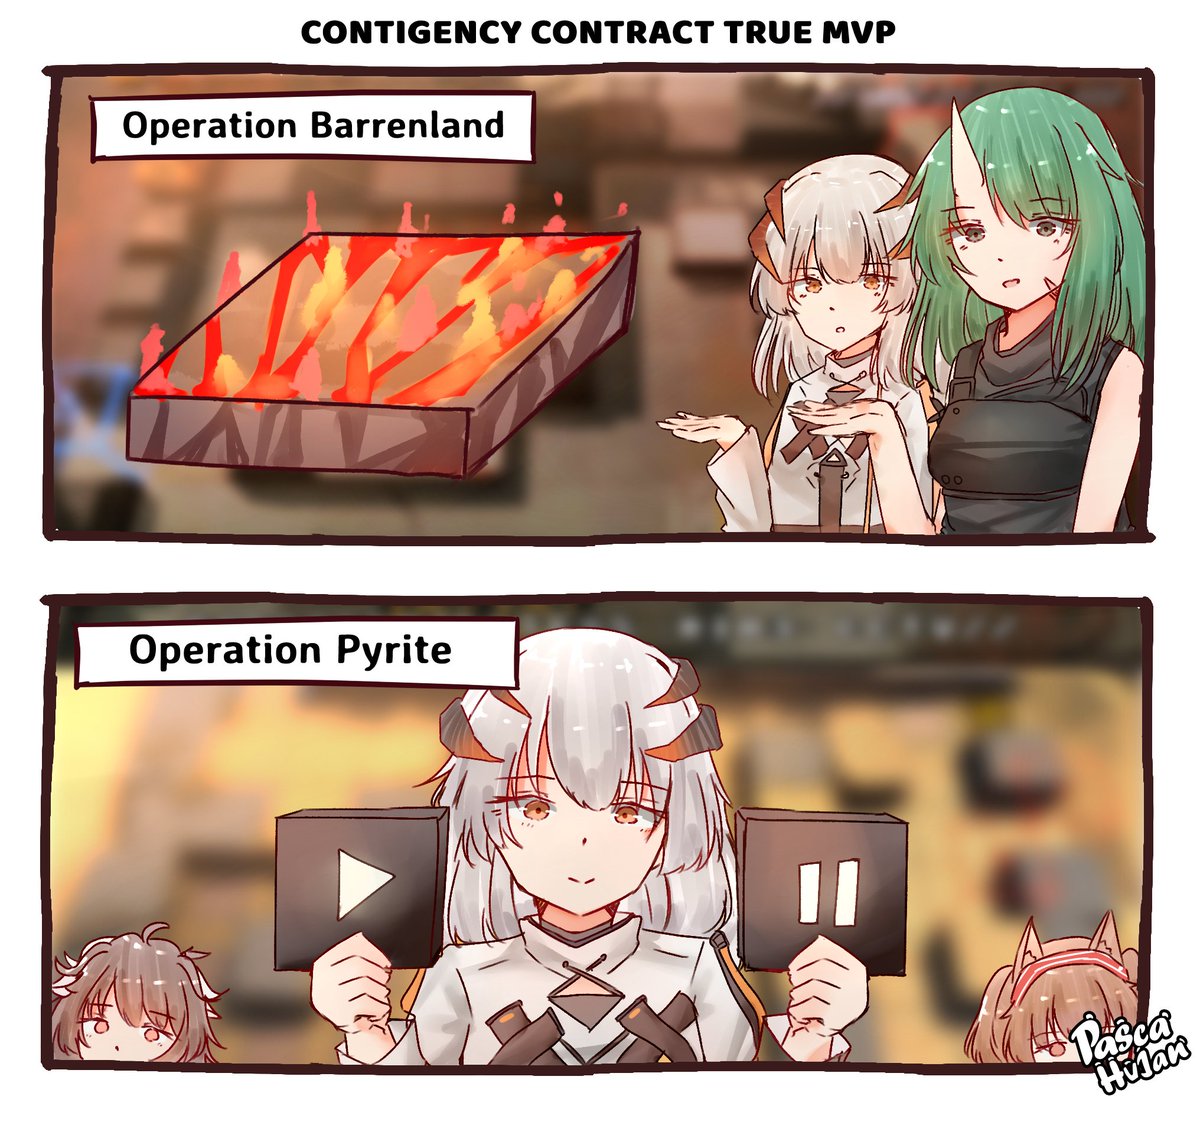 Contigency Contract True MVP
---
#明日方舟 #アークナイツ #명일방주 #Arknights 

*Time is really crucial in this events, I rely my win to those 2 button so much haha 